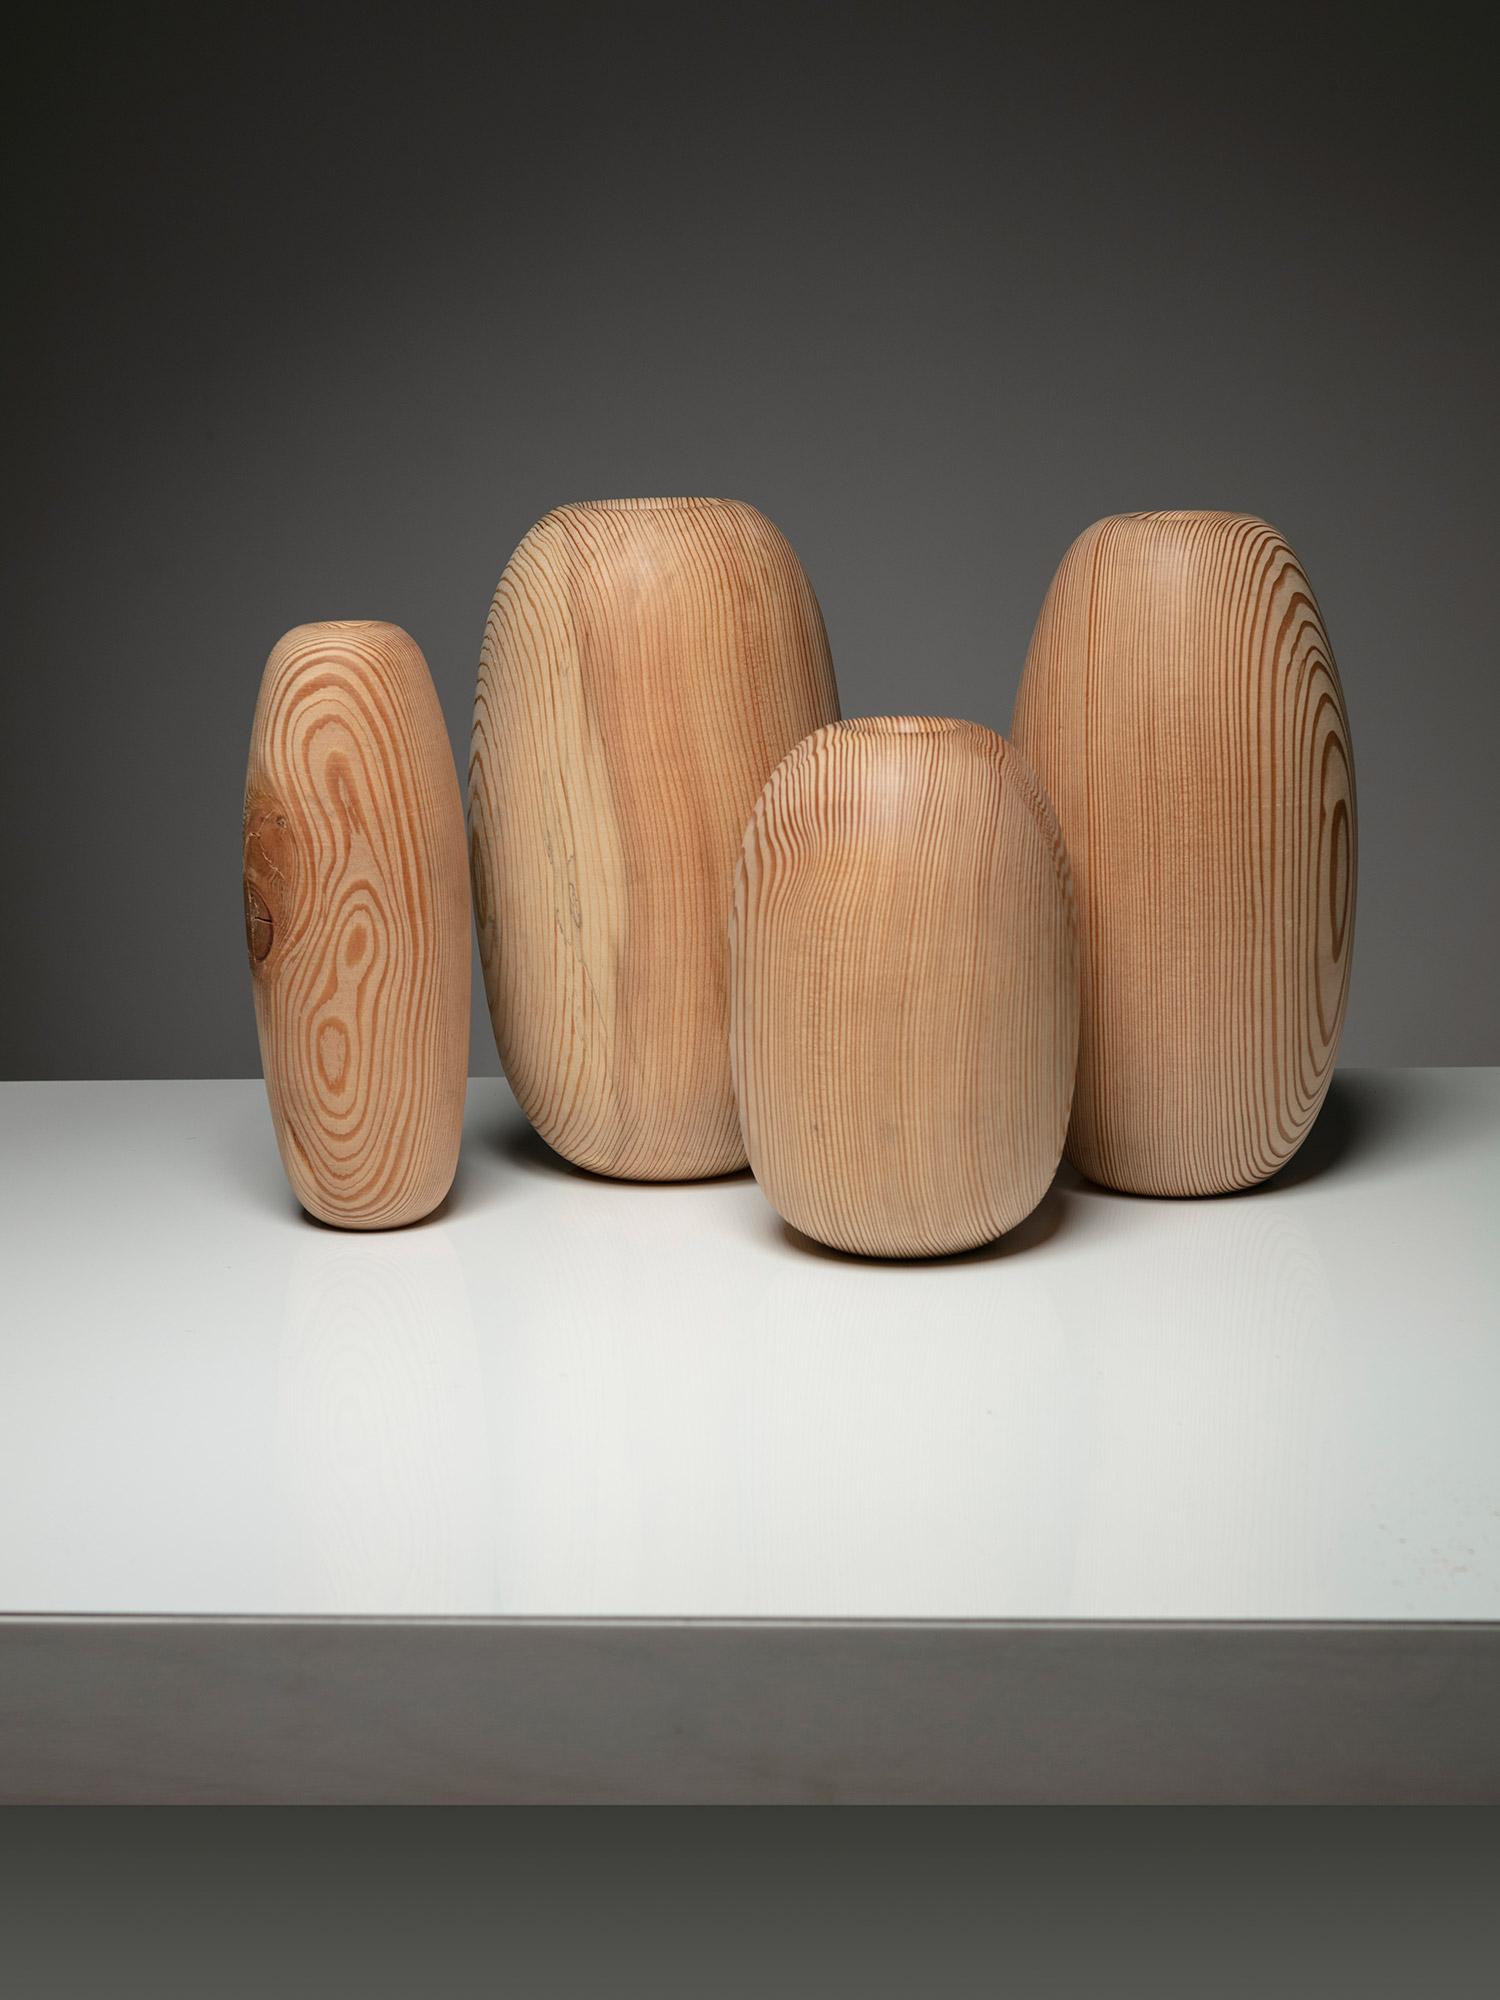 Set of four solid wood vases.
Lathed larch blocks with amazing veneers.
Size refers to the tallest piece.